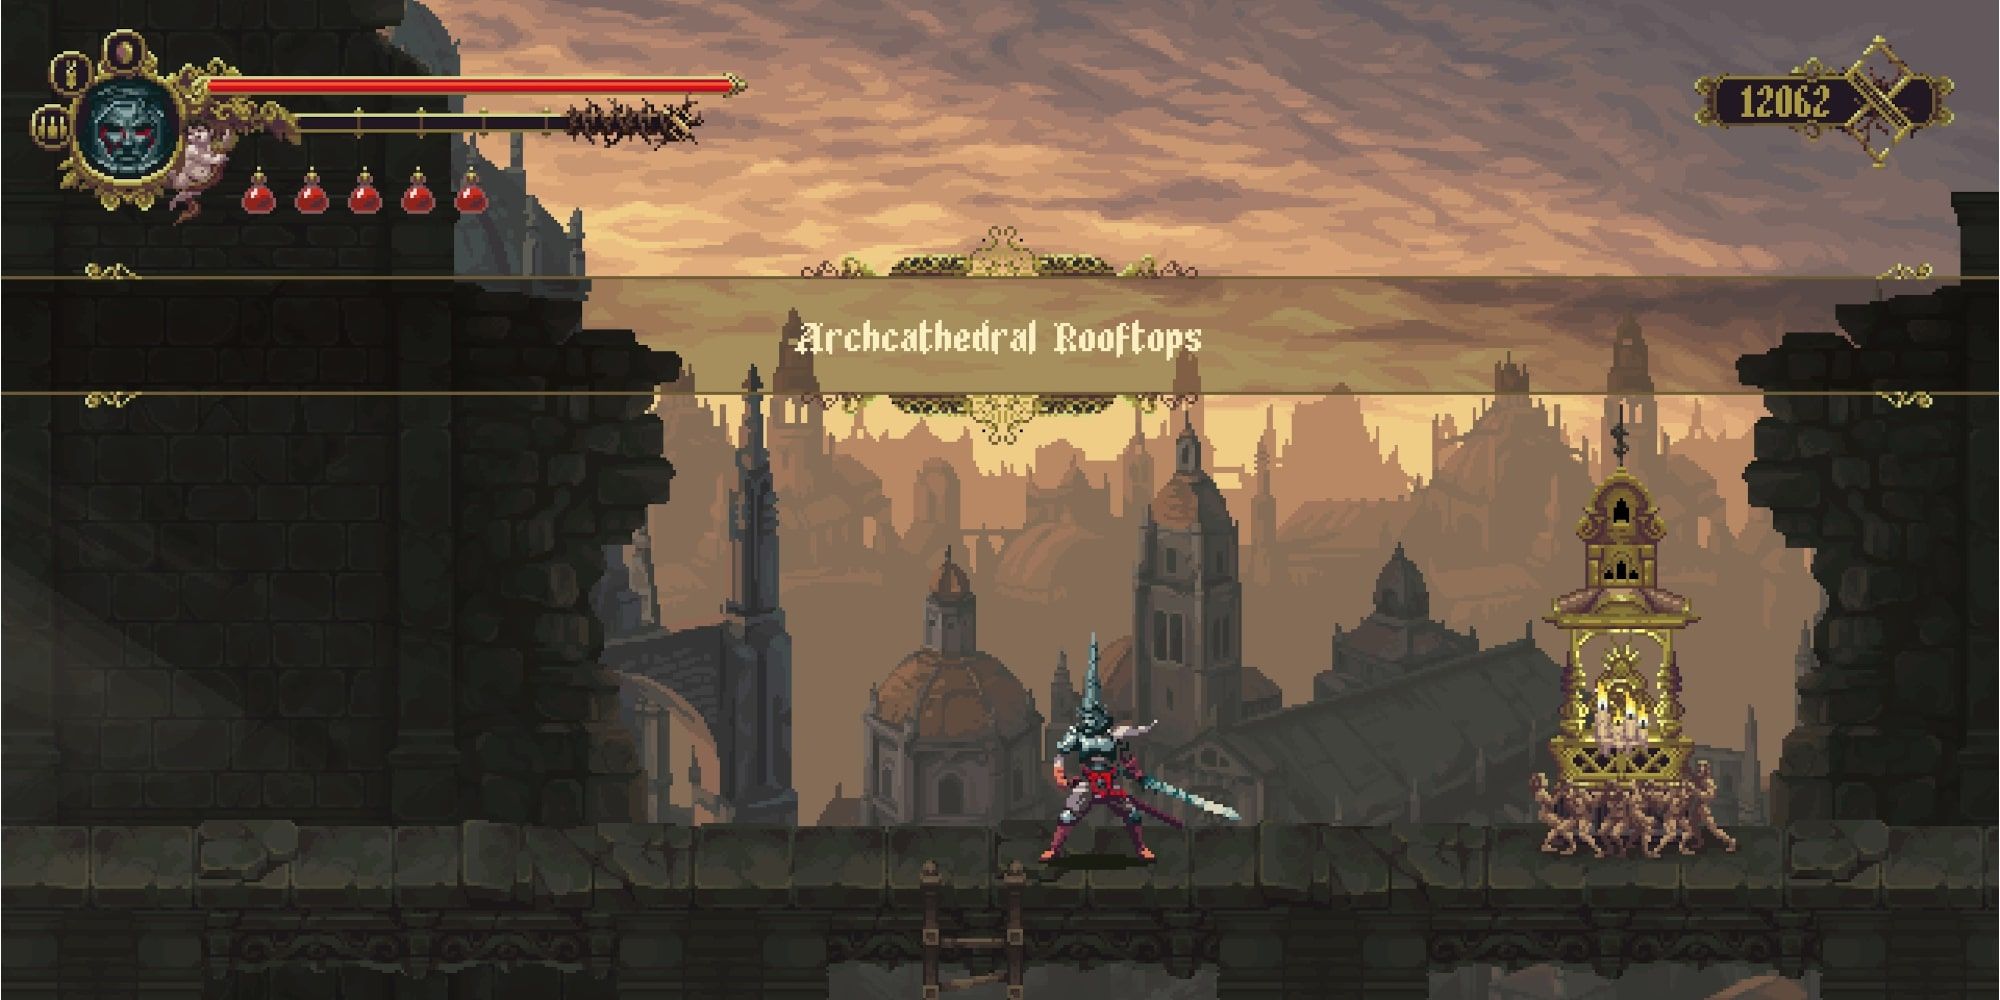 blasphemous character with sword on archcathedral rooftops